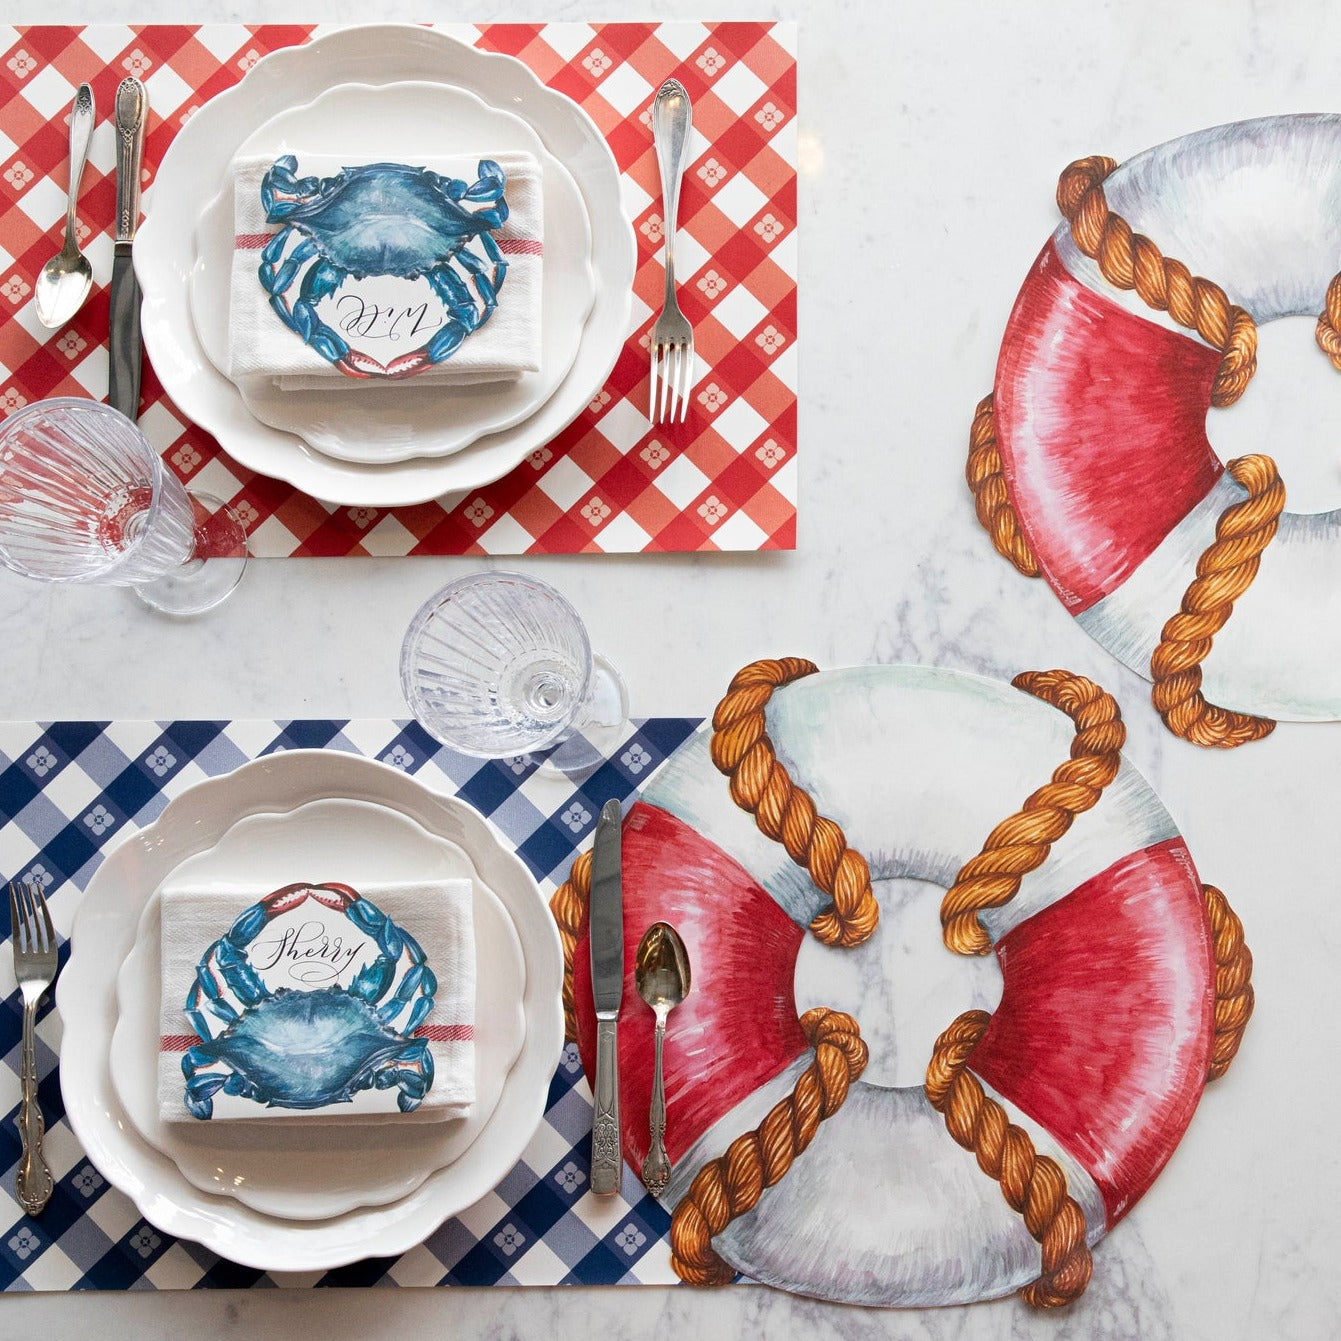 The red and blue Picnic Check Placemats under a nautical-themed table setting for two, from above.